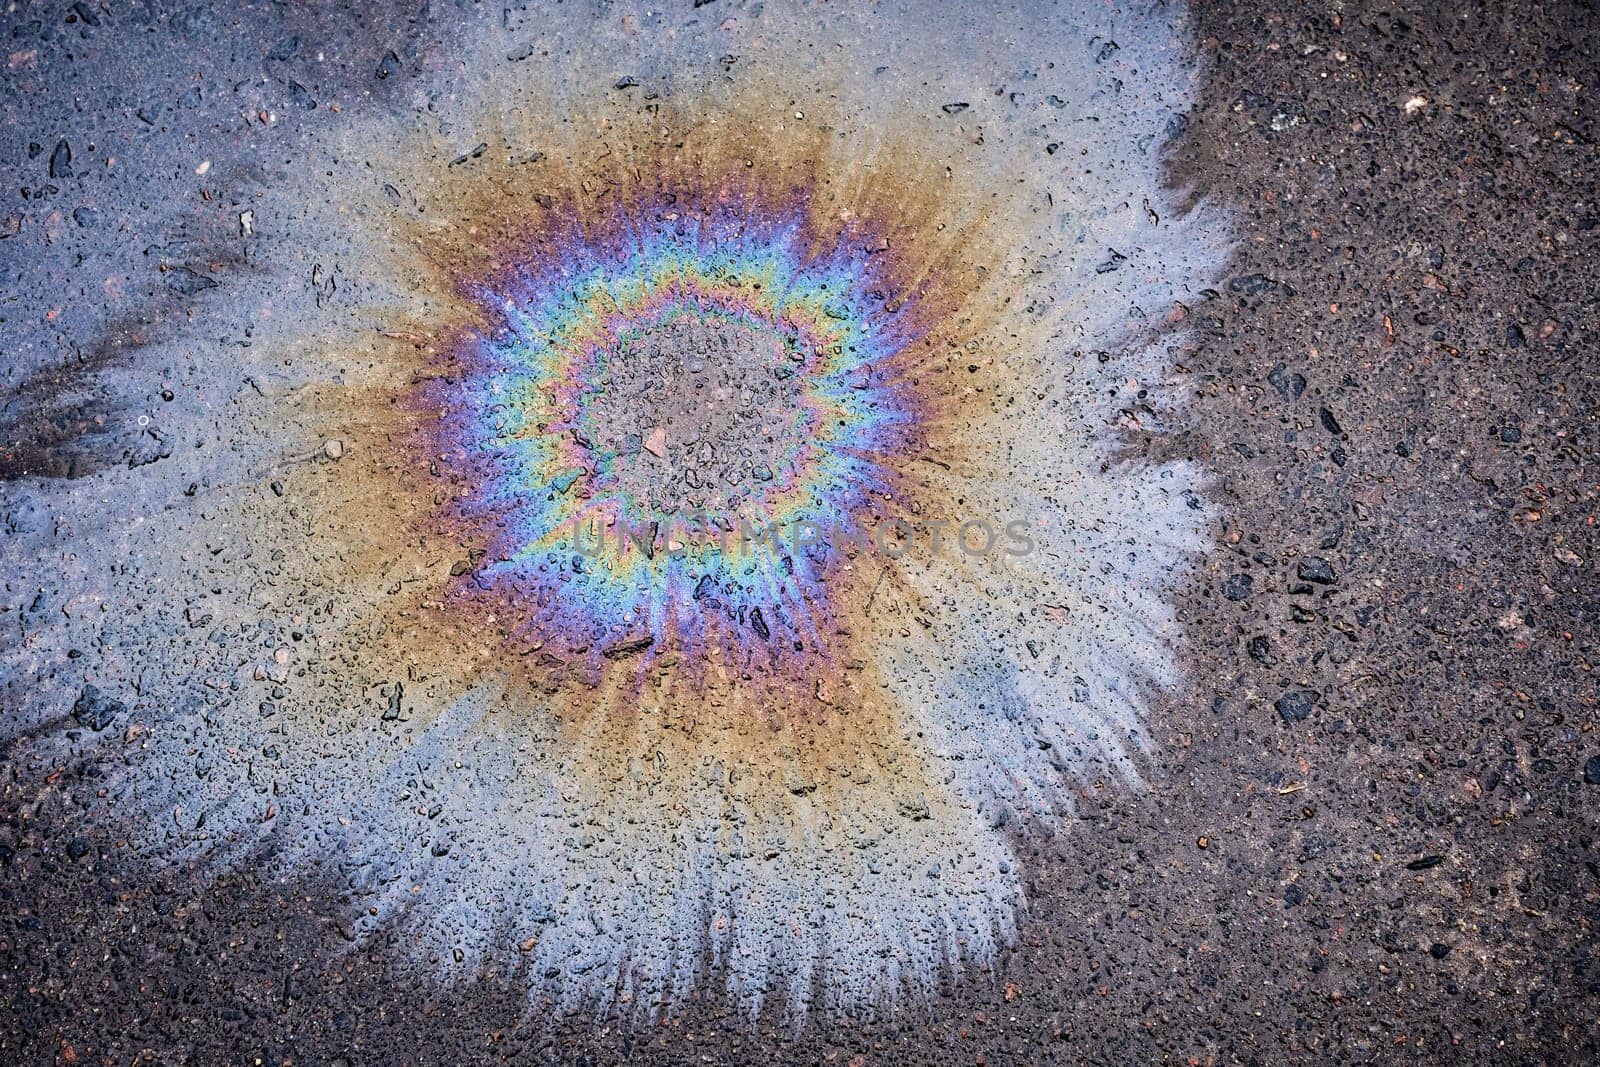 Close-up of an iridescent oil or gasoline spill on a wet asphalt, viewed from above. Bold multicolored spots on the asphalt